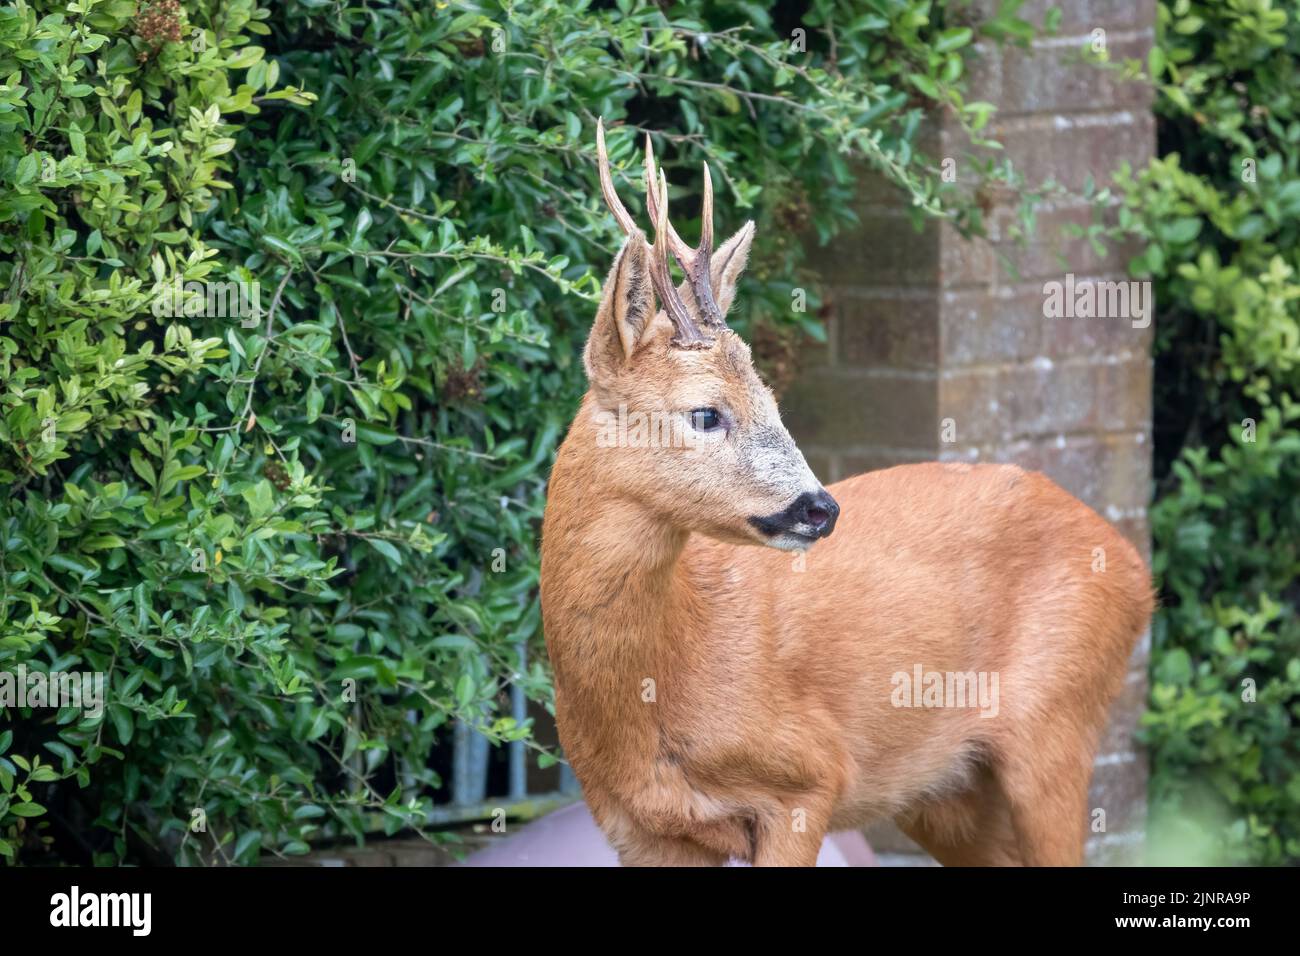 detailed close-up of a wild roe deer buck (Capreolus capreolus) in a domestic garden Stock Photo